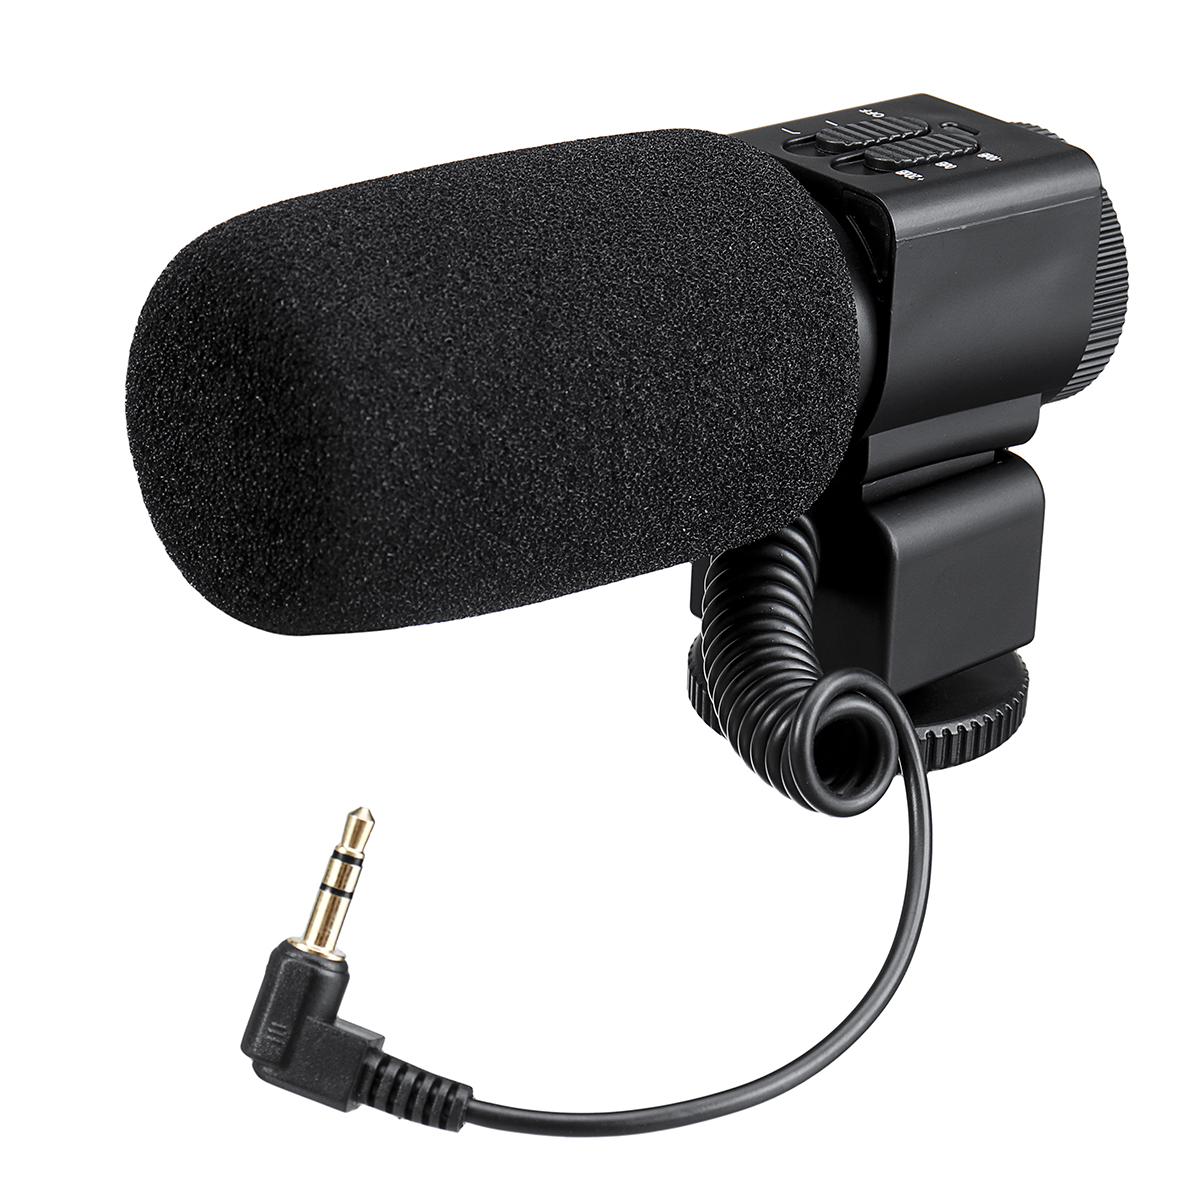 35mm-External-Stereo-Microphone-MIC-for-Canon-DSLR-Camera-DV-Camcorder-1653411-3